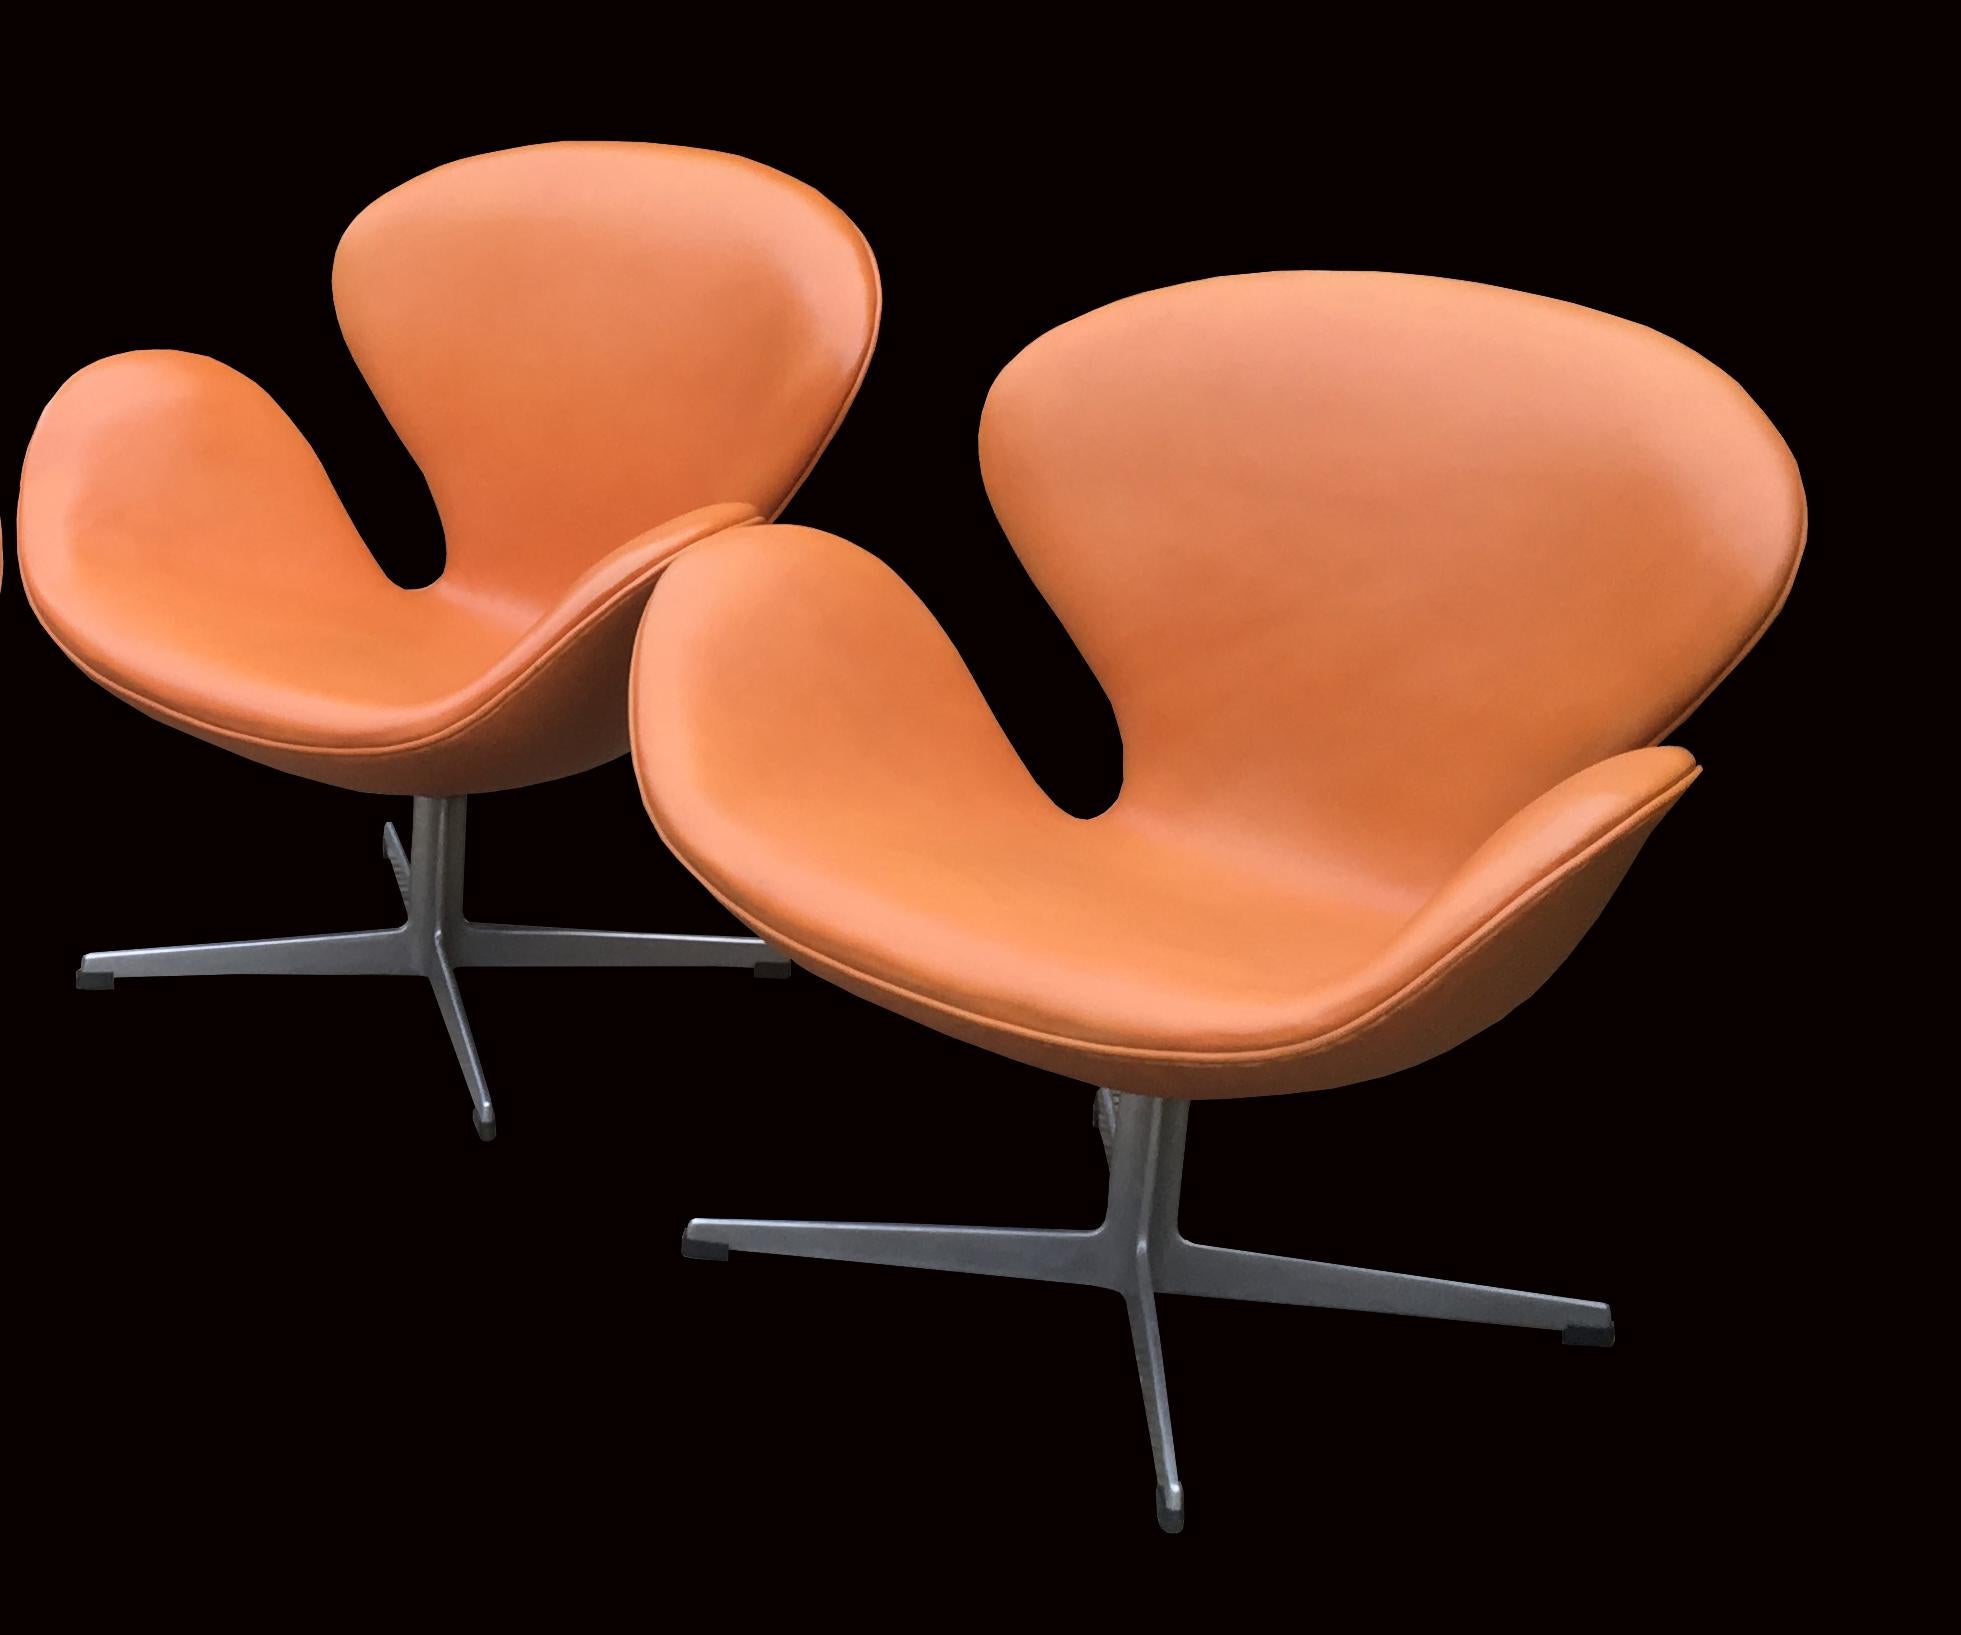 Danish Rare Pair of Cognac Leather Swan Chairs by Arne Jacobsen for Fritz Hansen